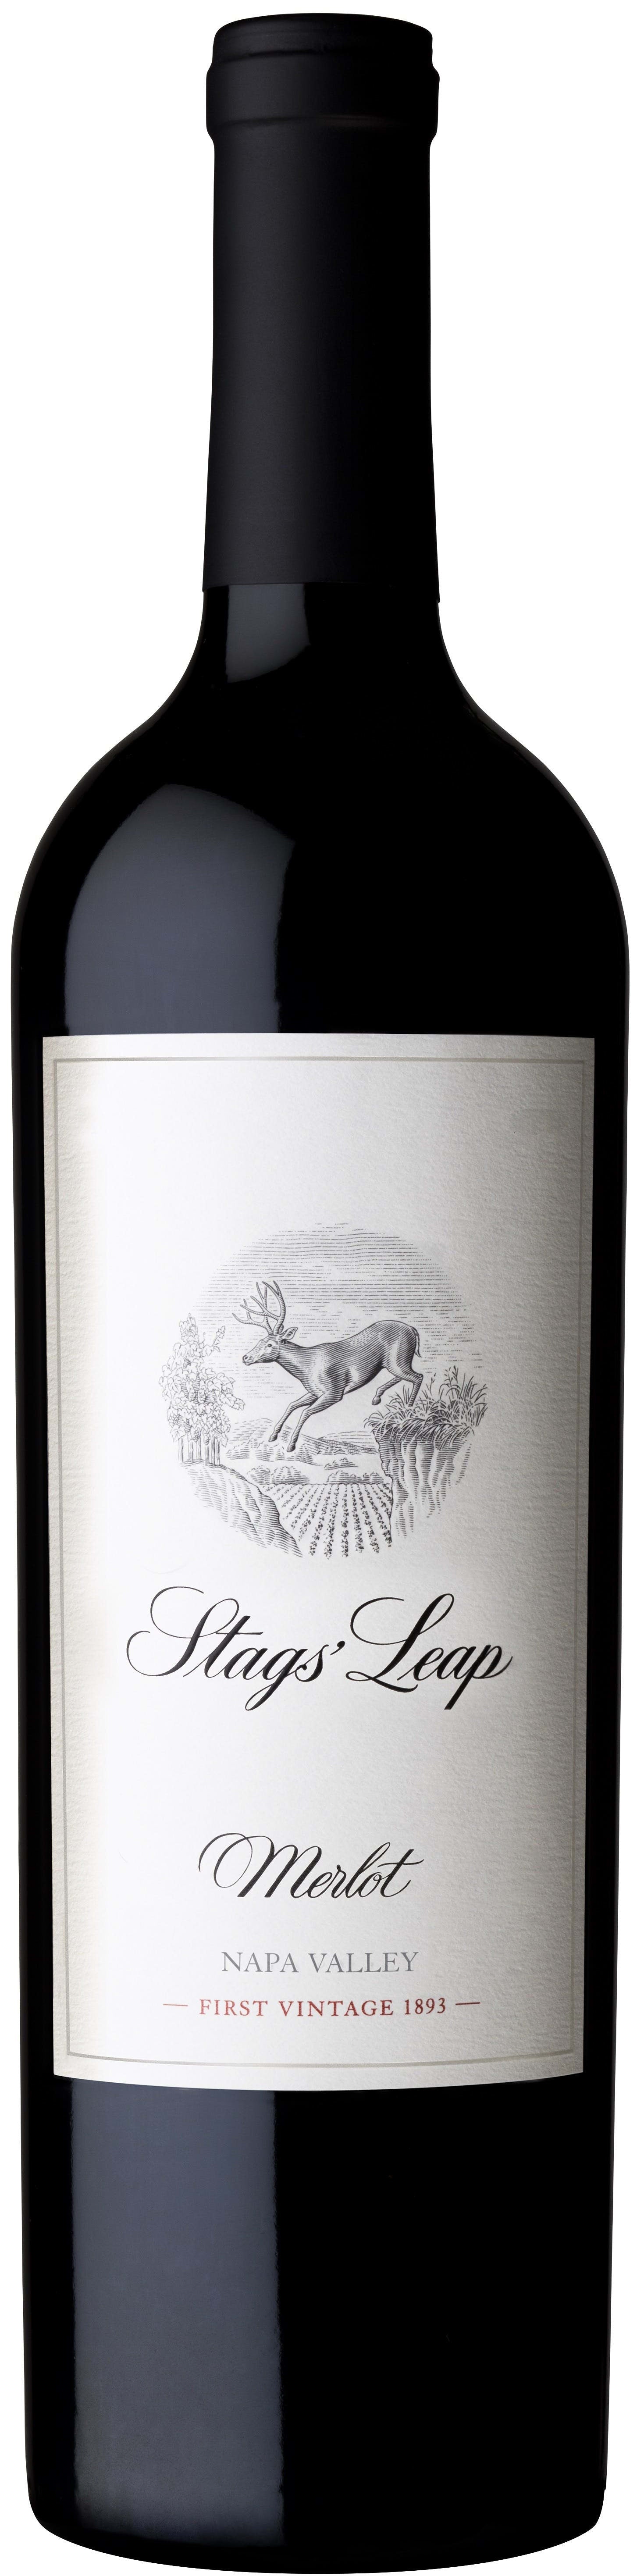 2020 Stags' Leap Winery Merlot